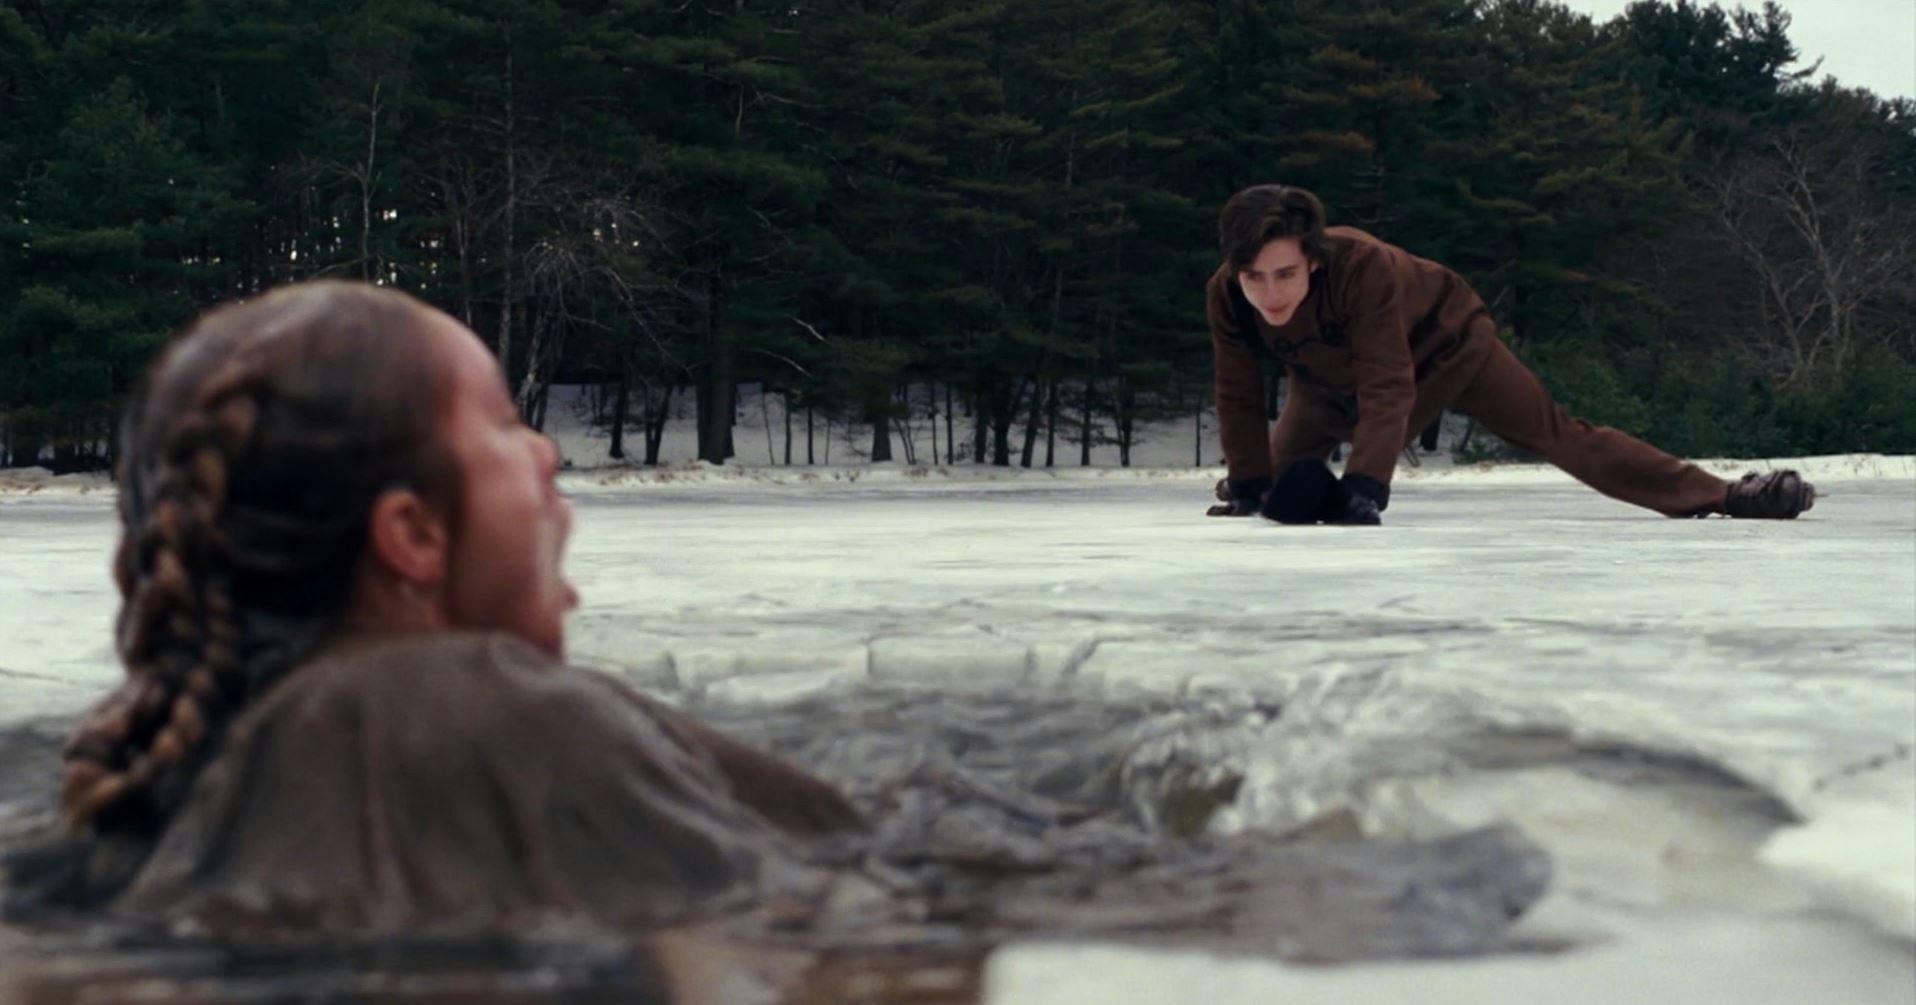 A man attempting to rescue a woman drowning in icy water